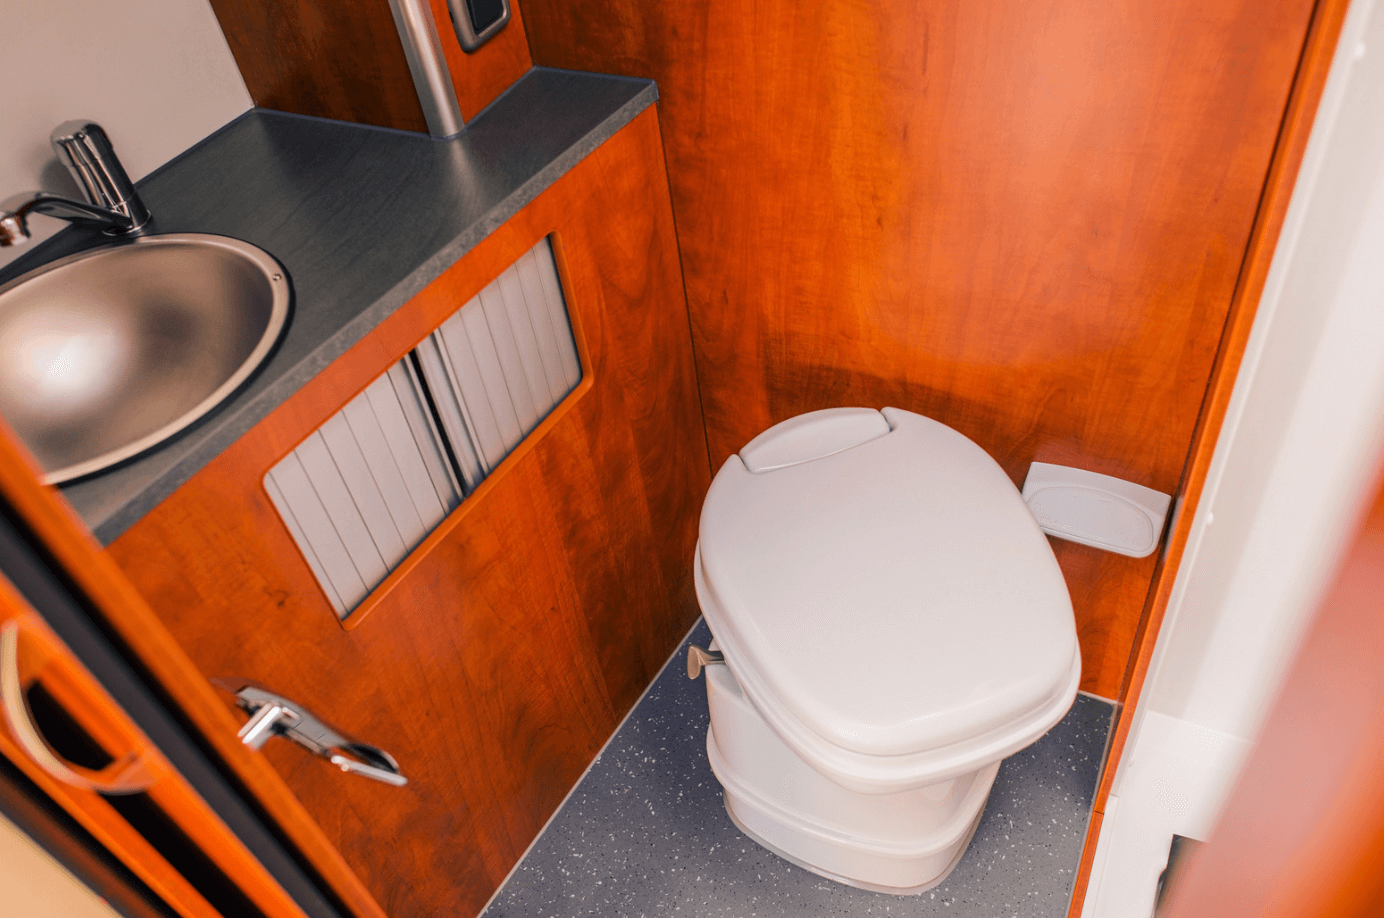 Can You Use The Bathroom Or Toilet In A Moving Motorhome?